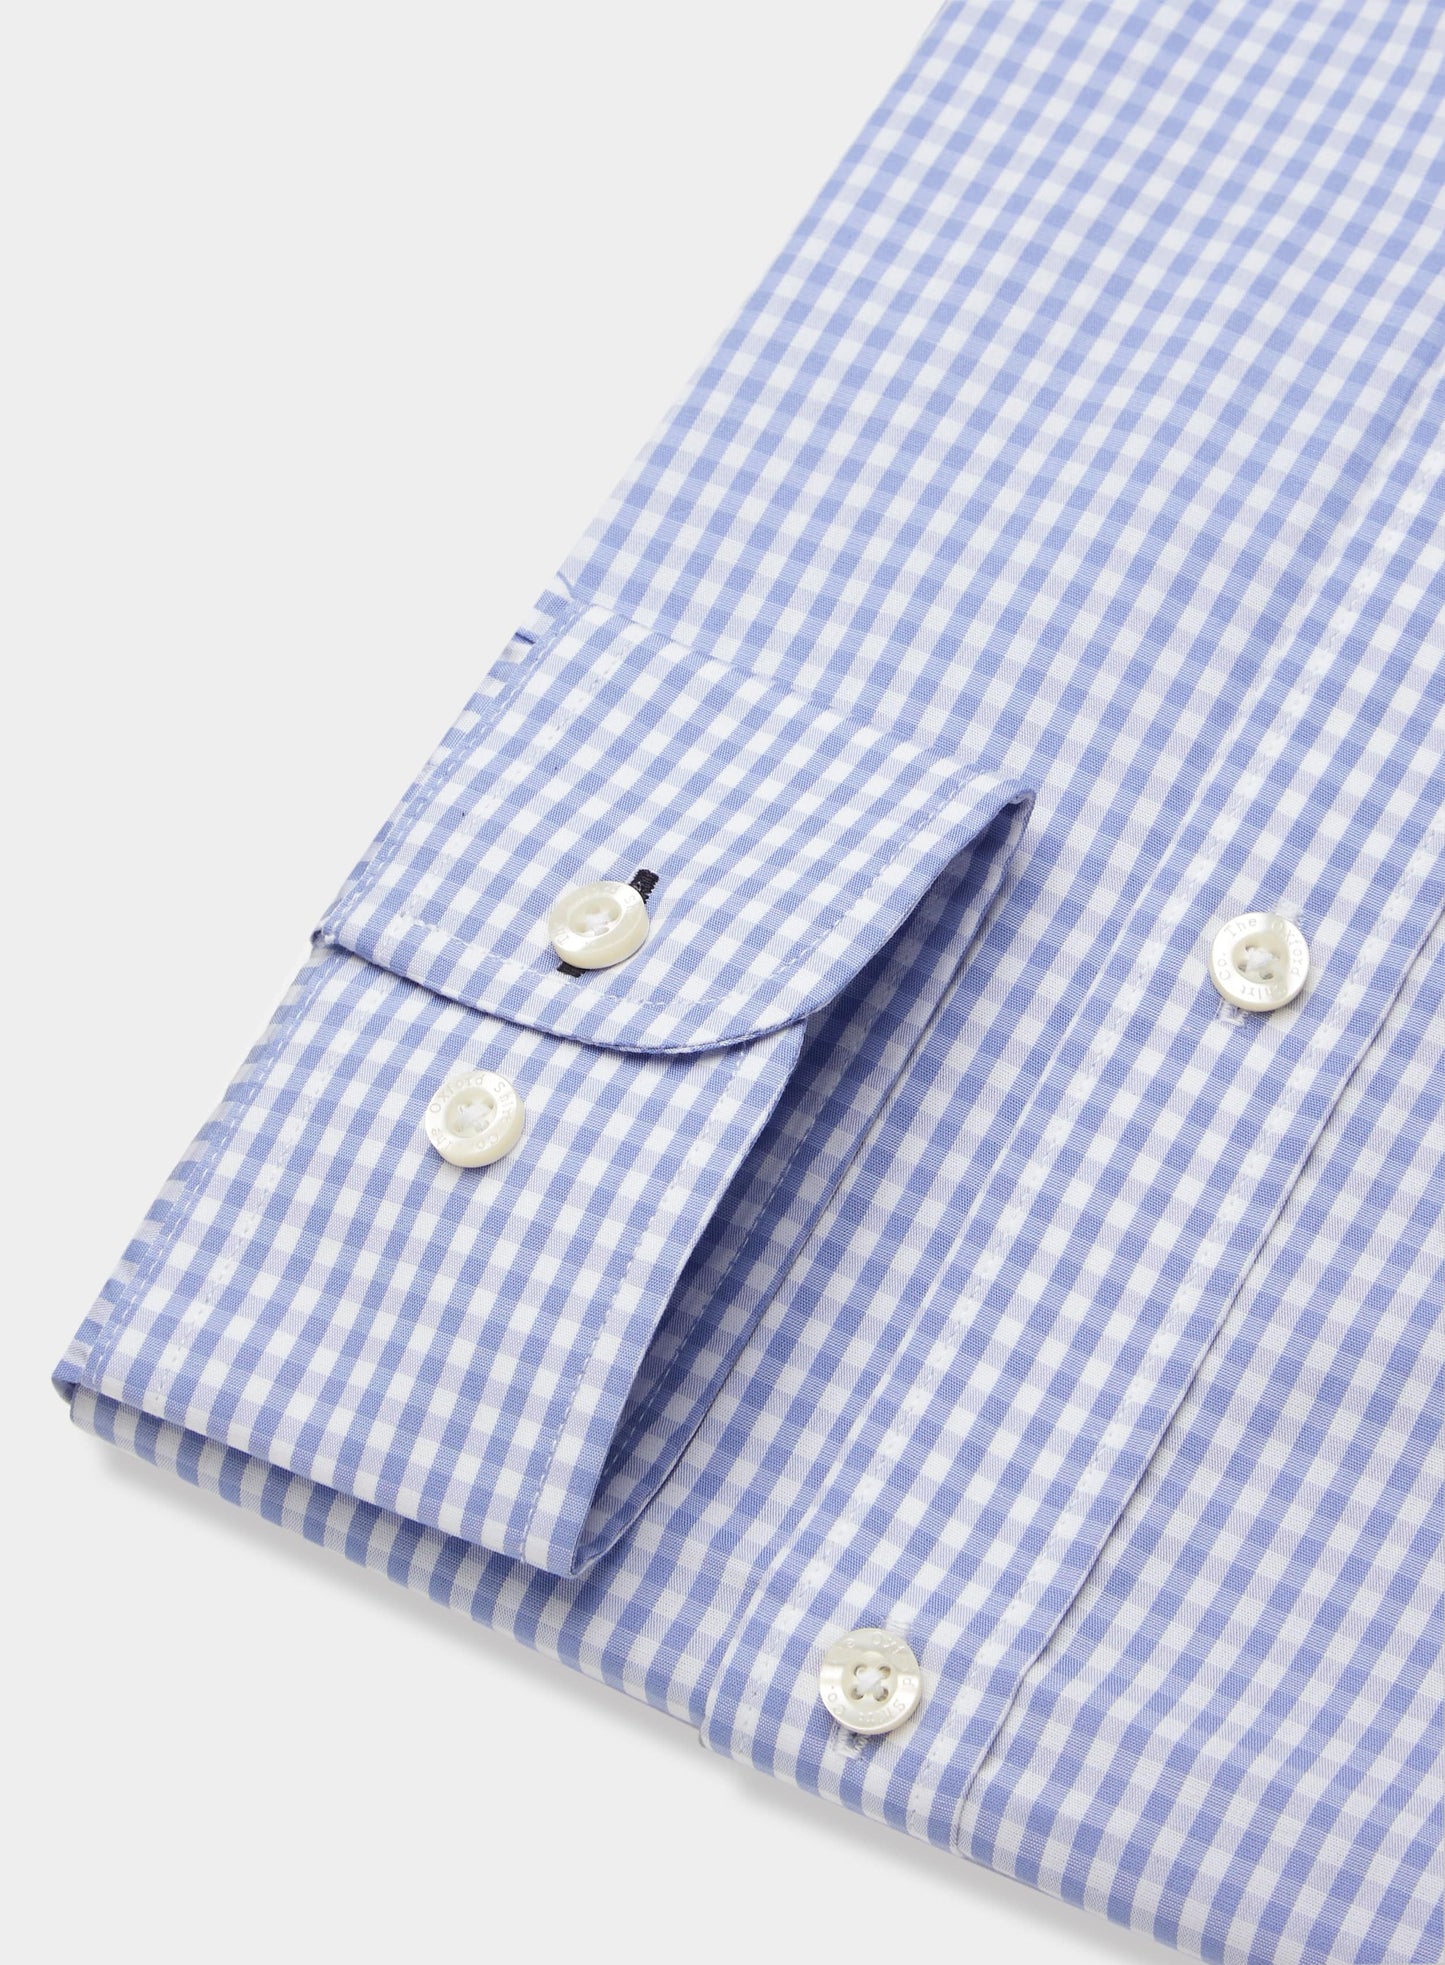 Classic Shirt in Pale Blue Gingham